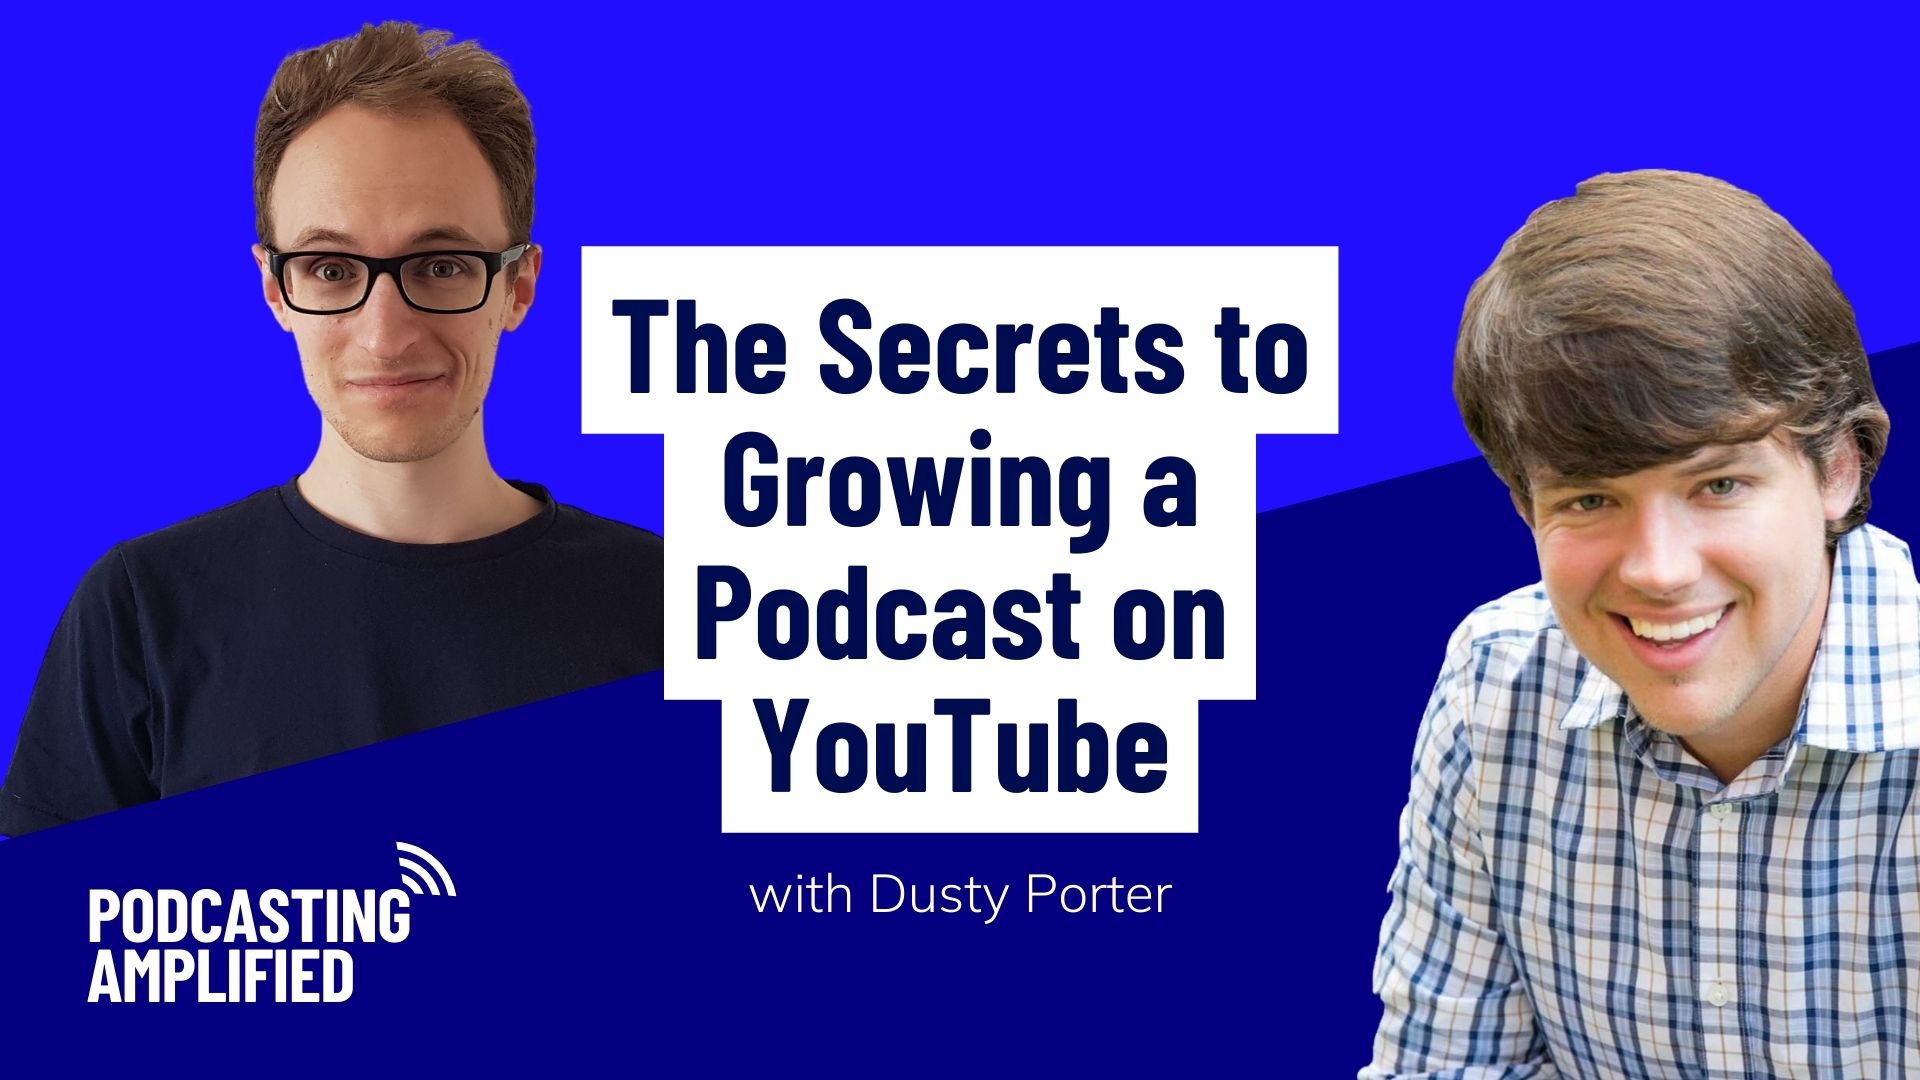 the secrets to growing a podcast on youtube text image